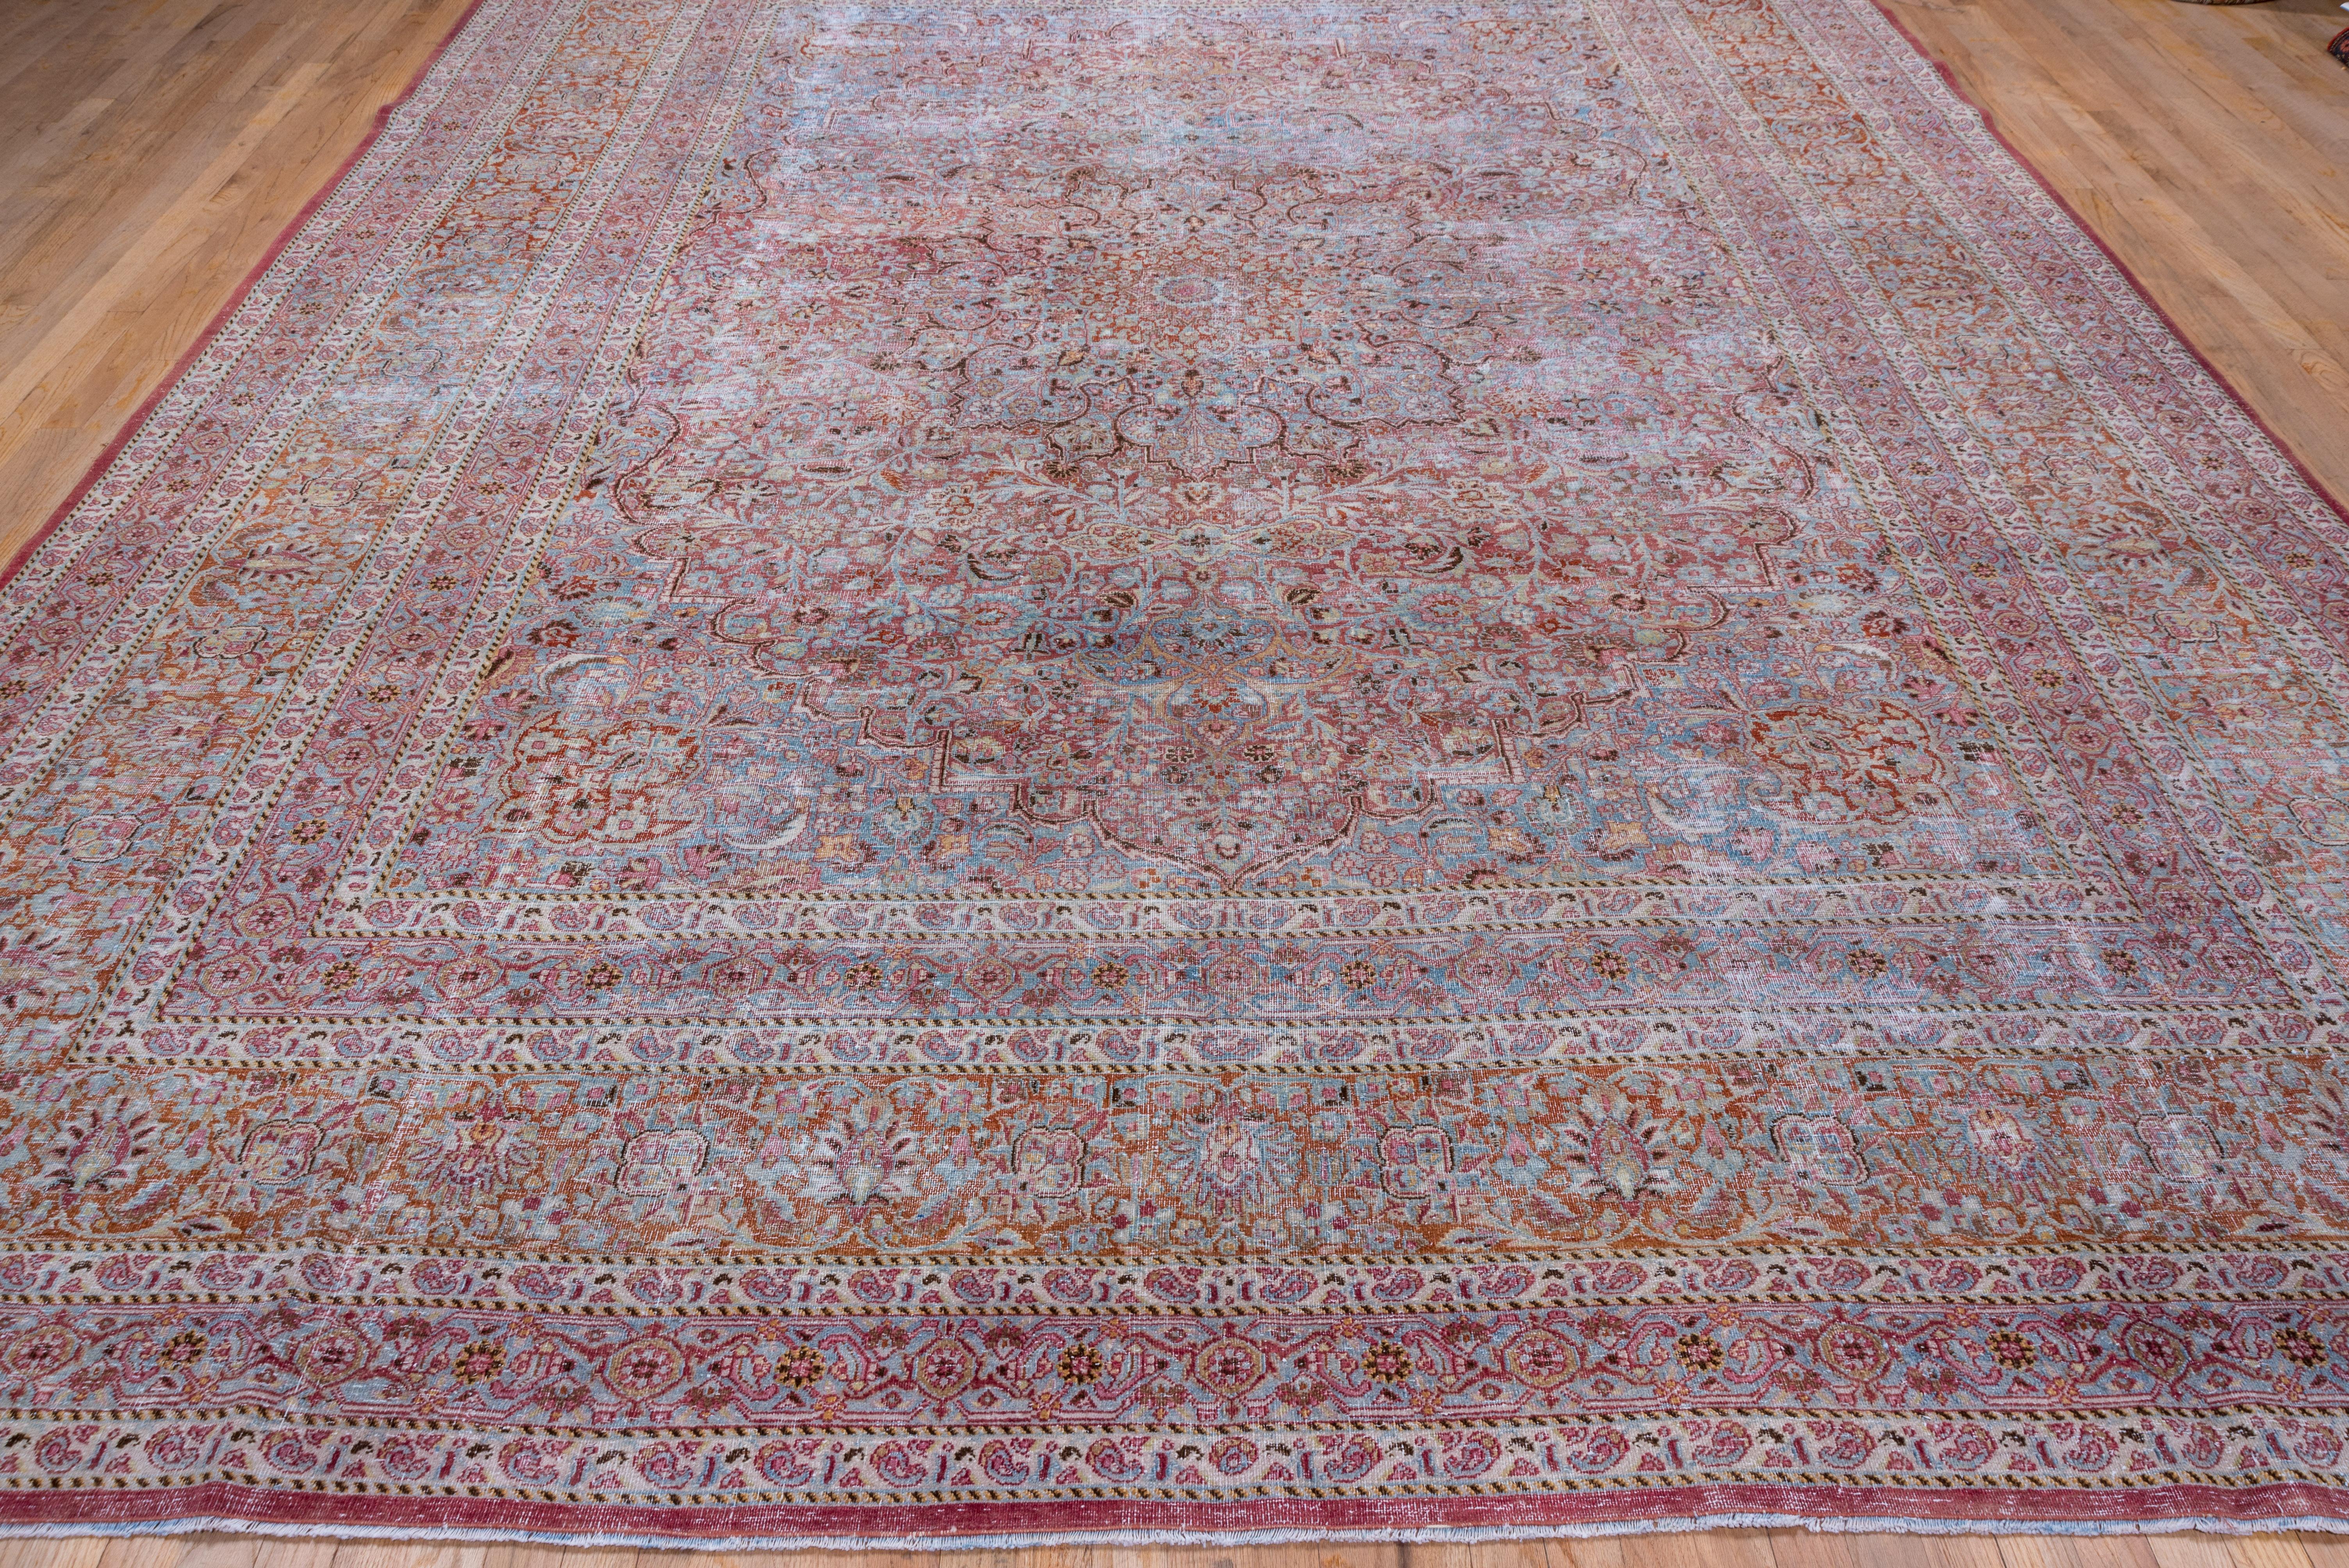 Mid-20th Century Colorful Antique Persian Khorassan Rug, Purple, Blue & Rust Accents, circa 1930s For Sale